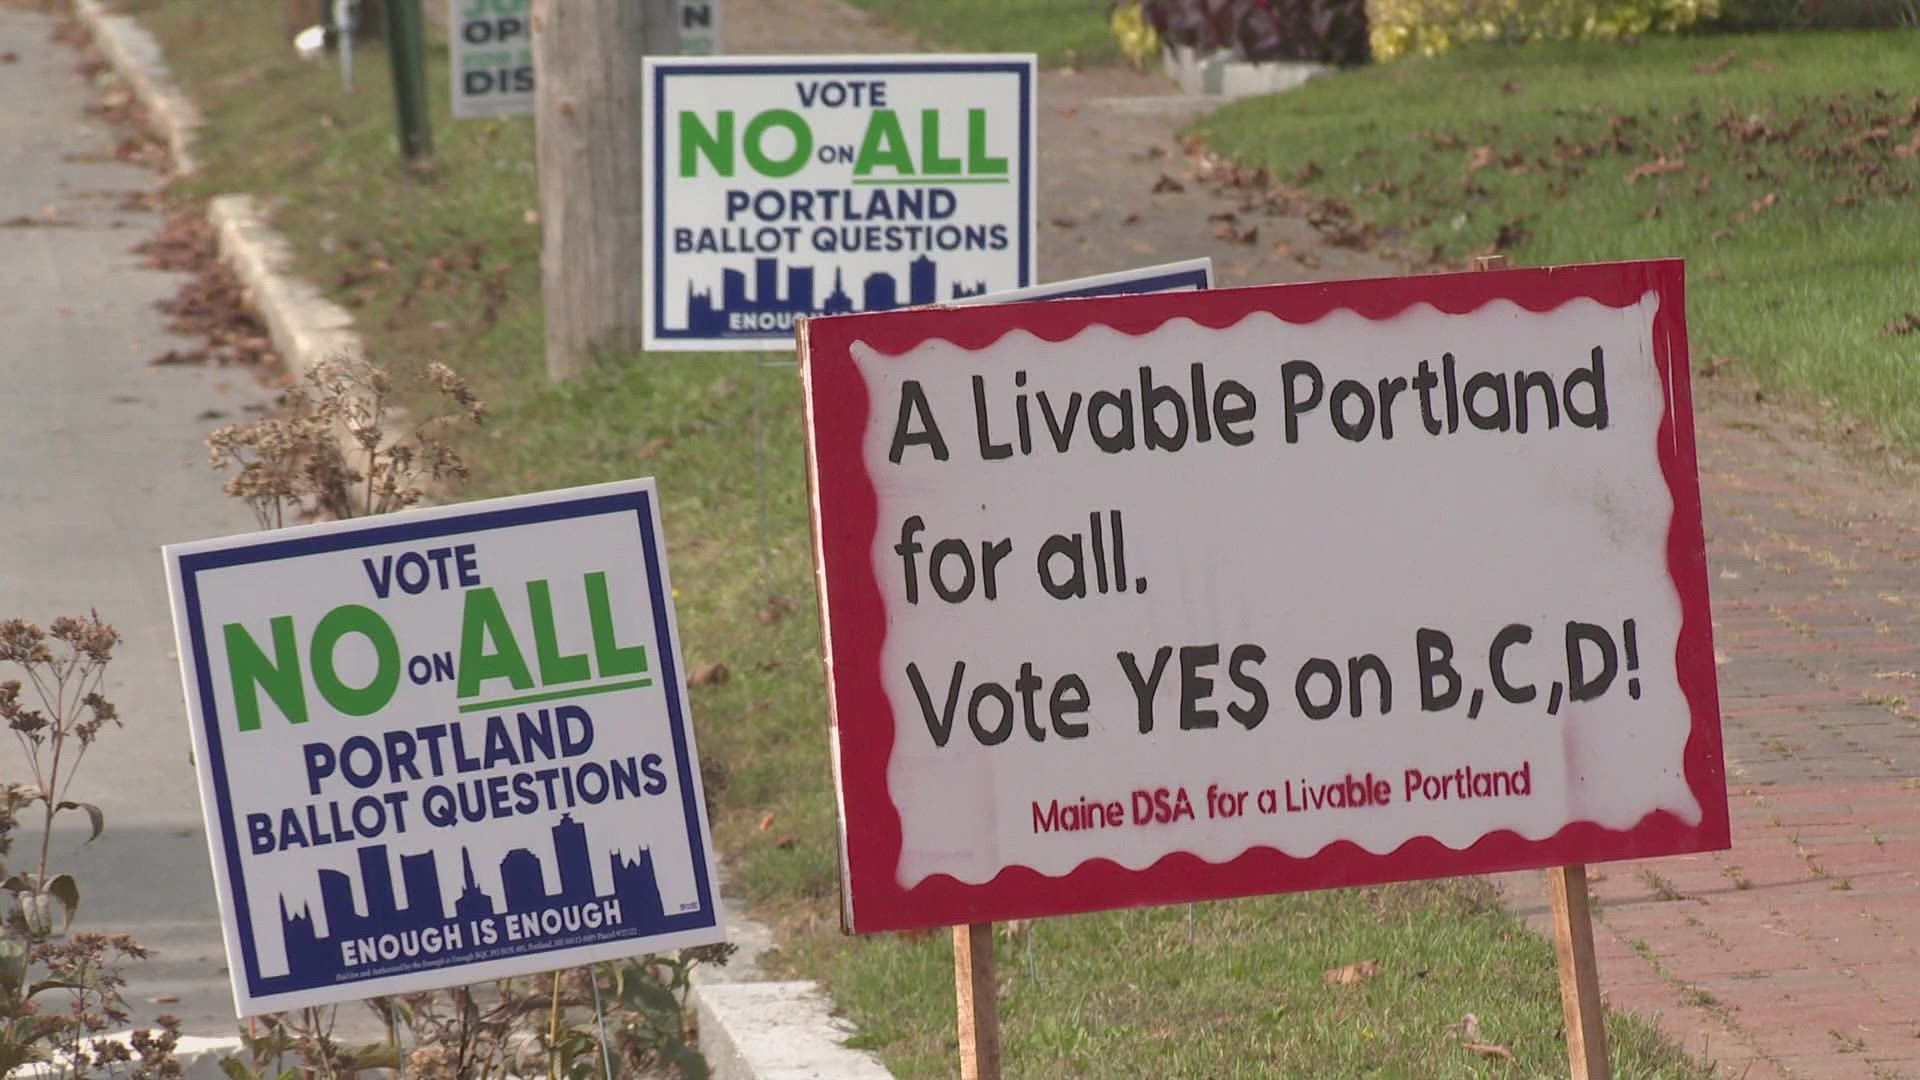 The latest campaign finance filings highlight a major fundraising advantage for groups opposed to the 13 ballot questions in Portland.